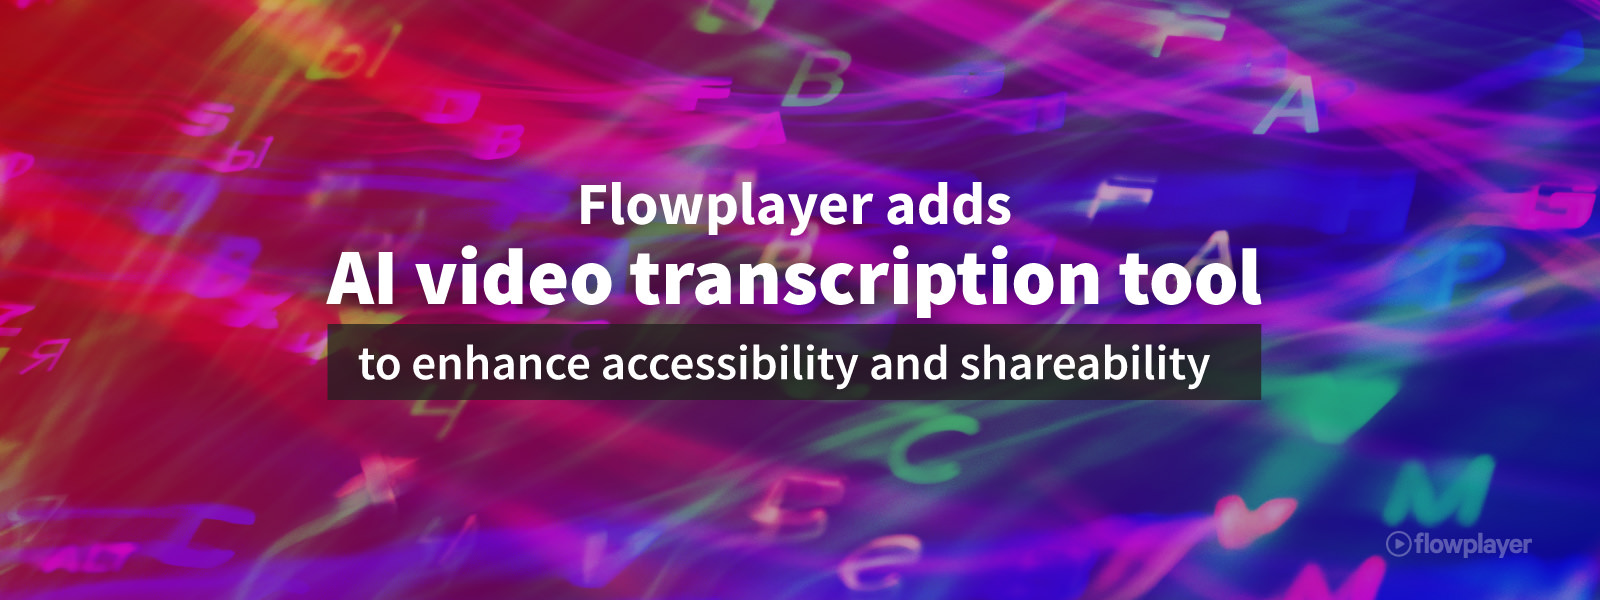 Flowplayer adds AI video transcription tool to enhance accessibility and shareability